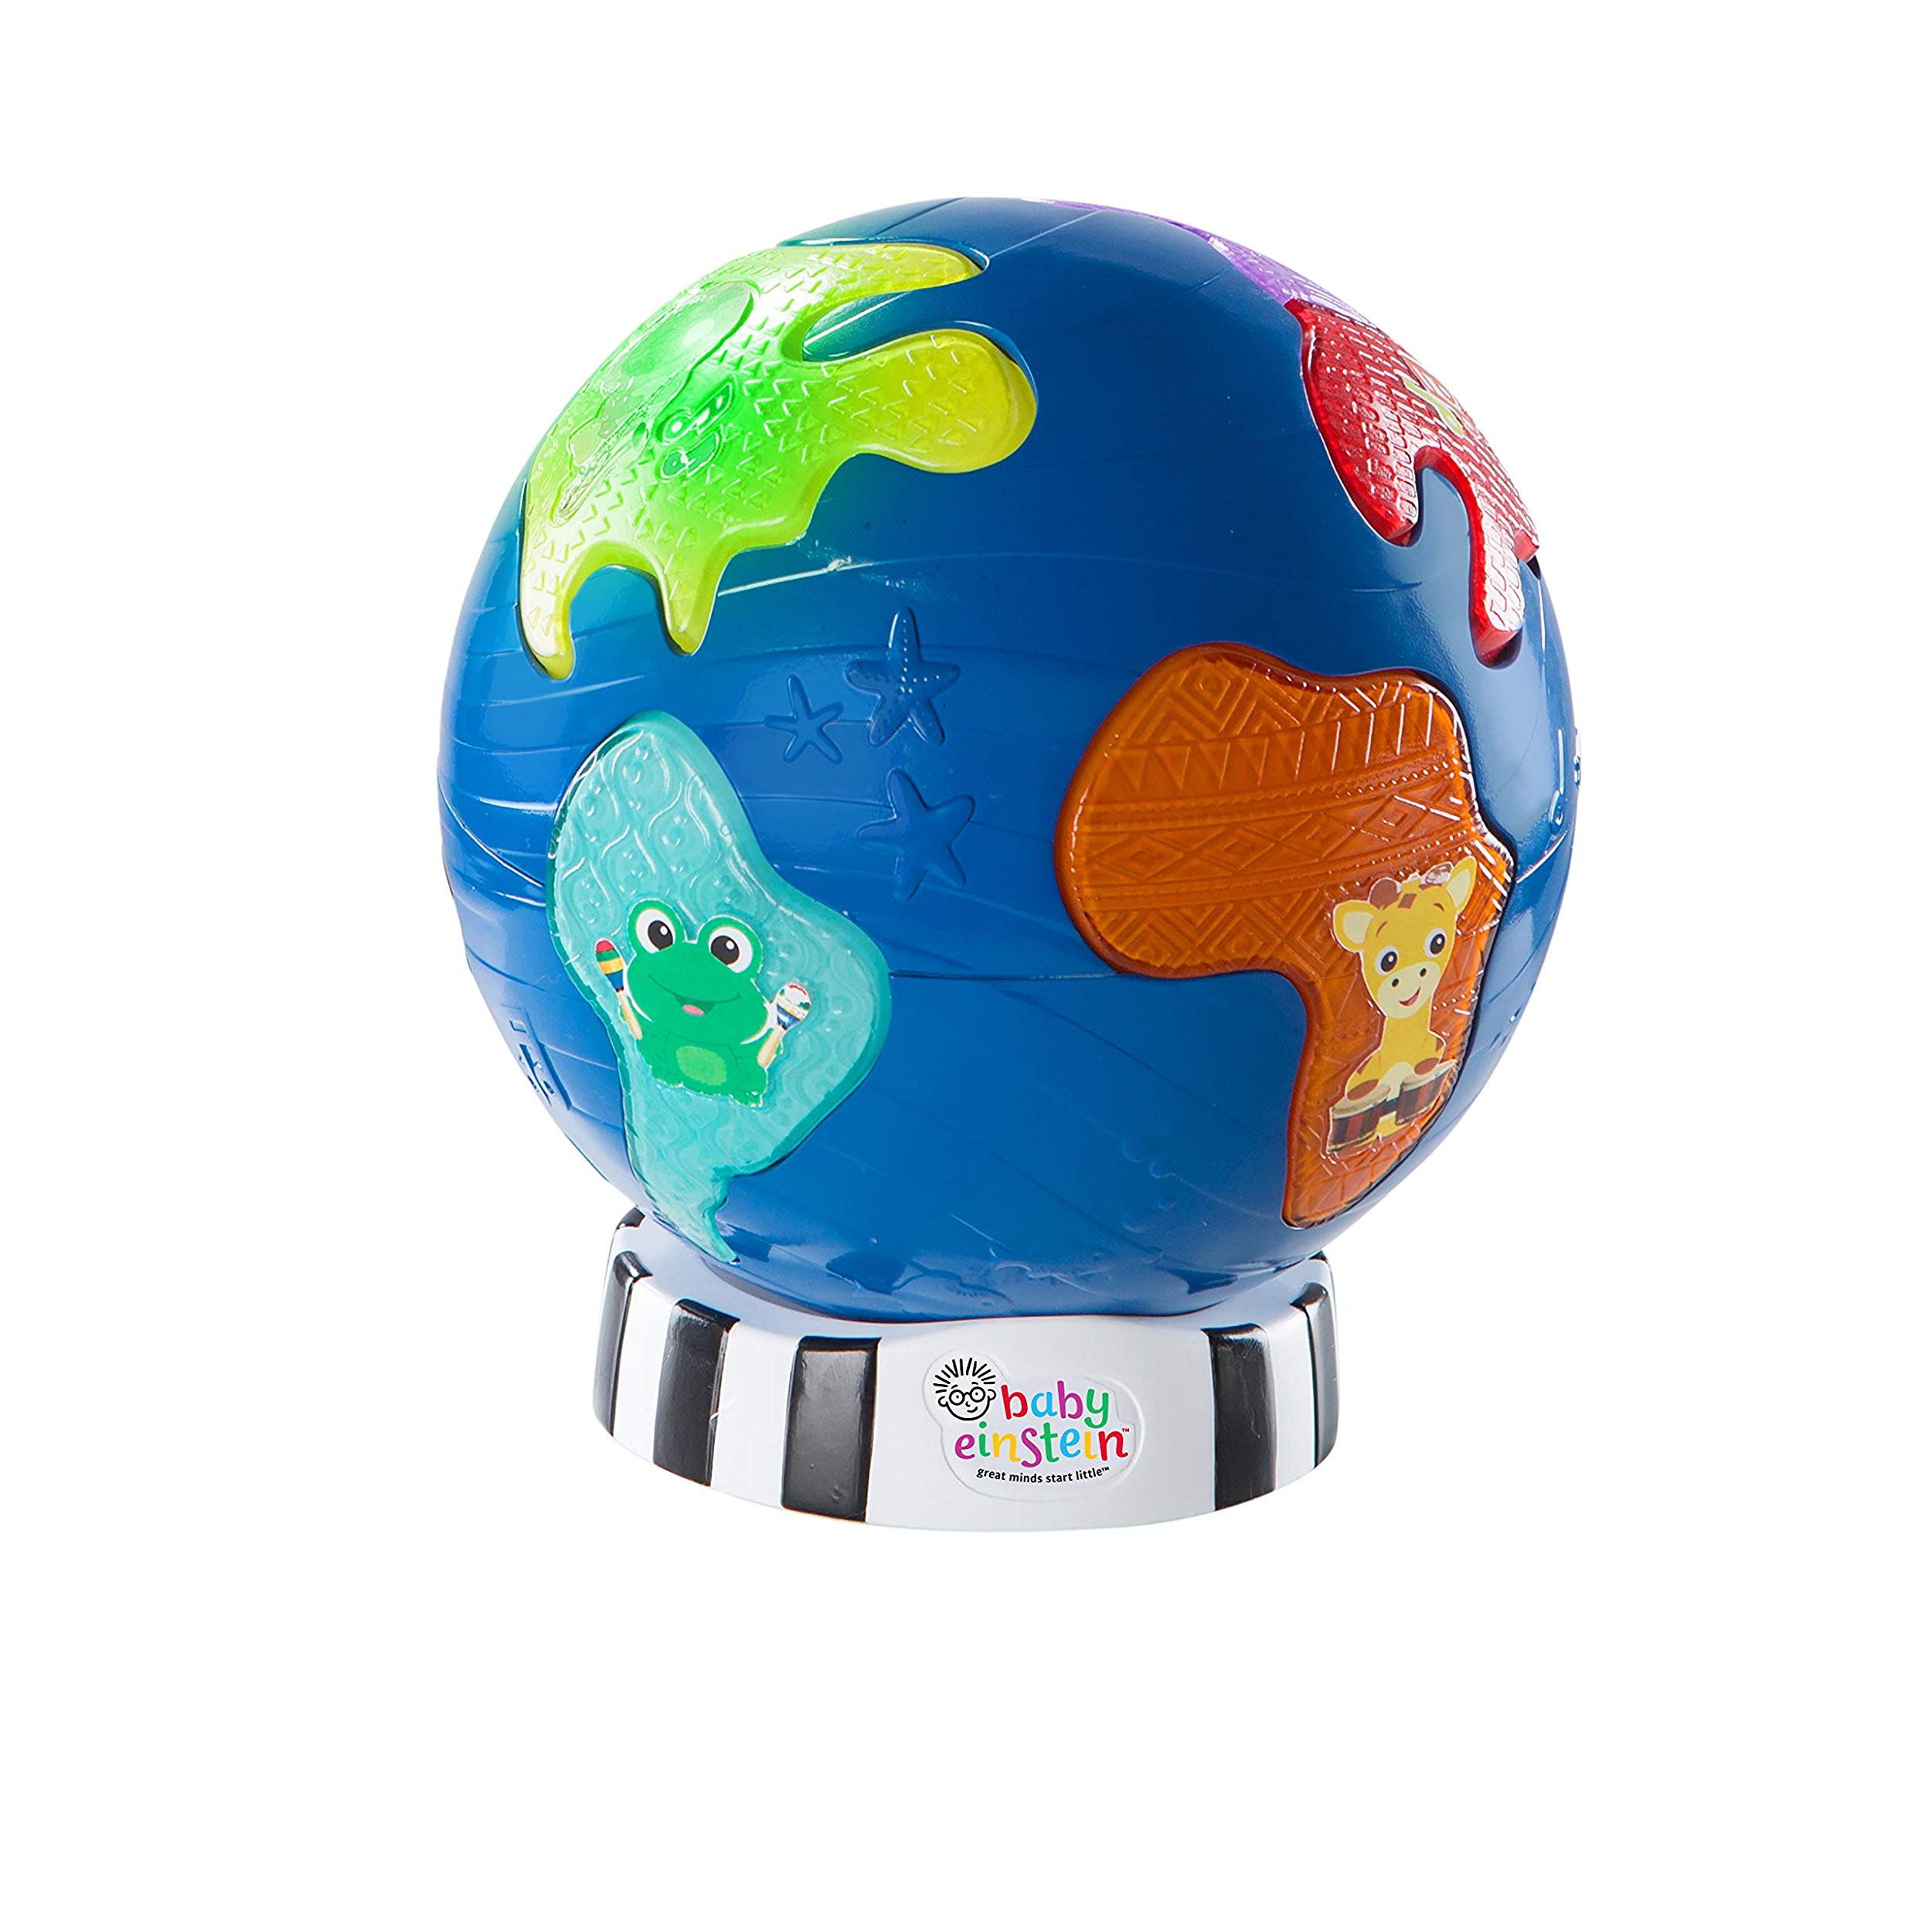 Discovery Kids Discovery Globe Toy